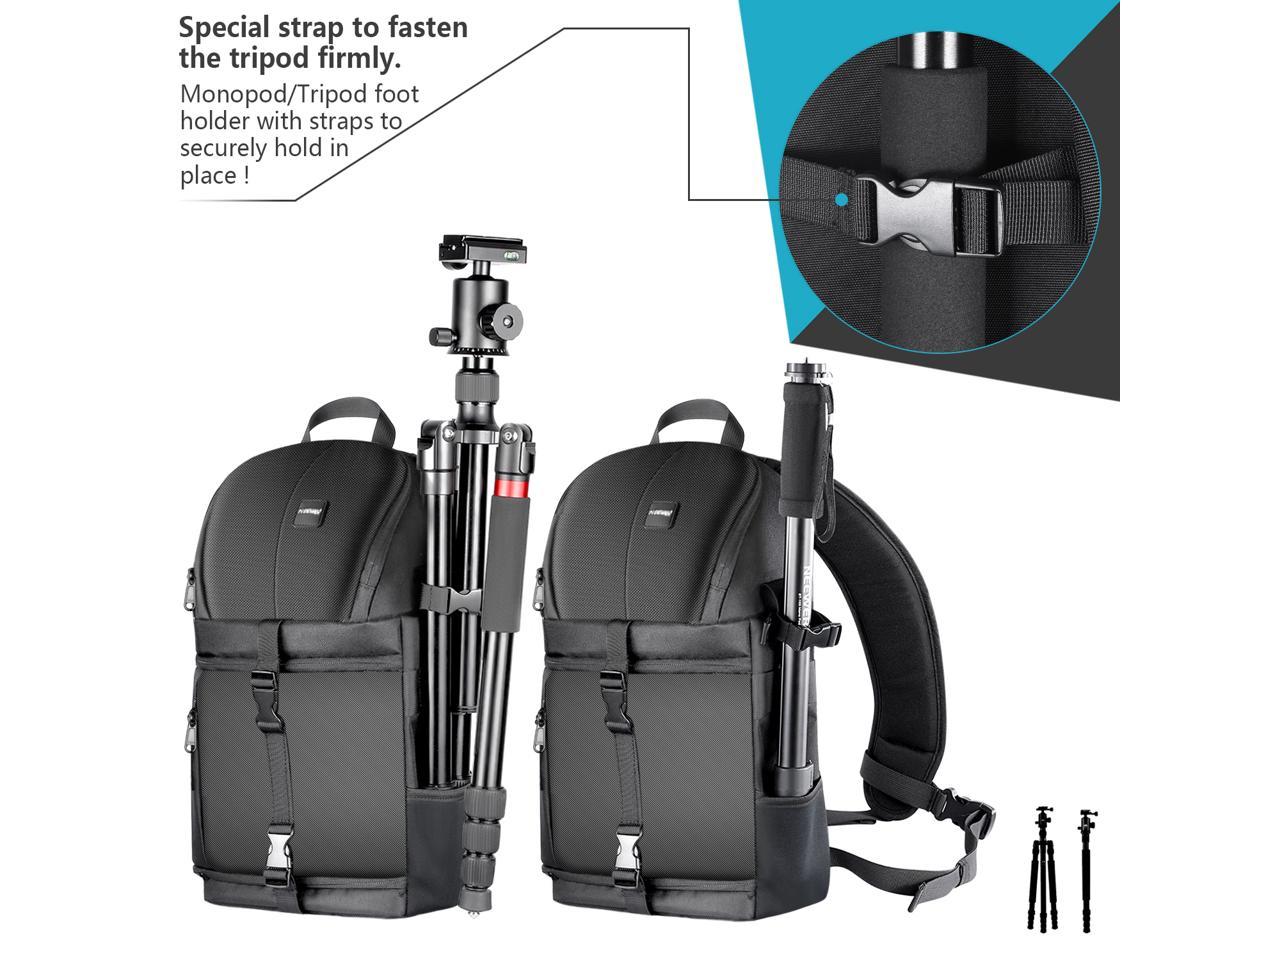 Camera Case Backpack with Padded Dividers for DSLR and Mirrorless Cameras Neewer Sling Camera Bag Black Tripods and Other Accessories Nikon, Canon, Sony Pentax Olympus etc. Lens